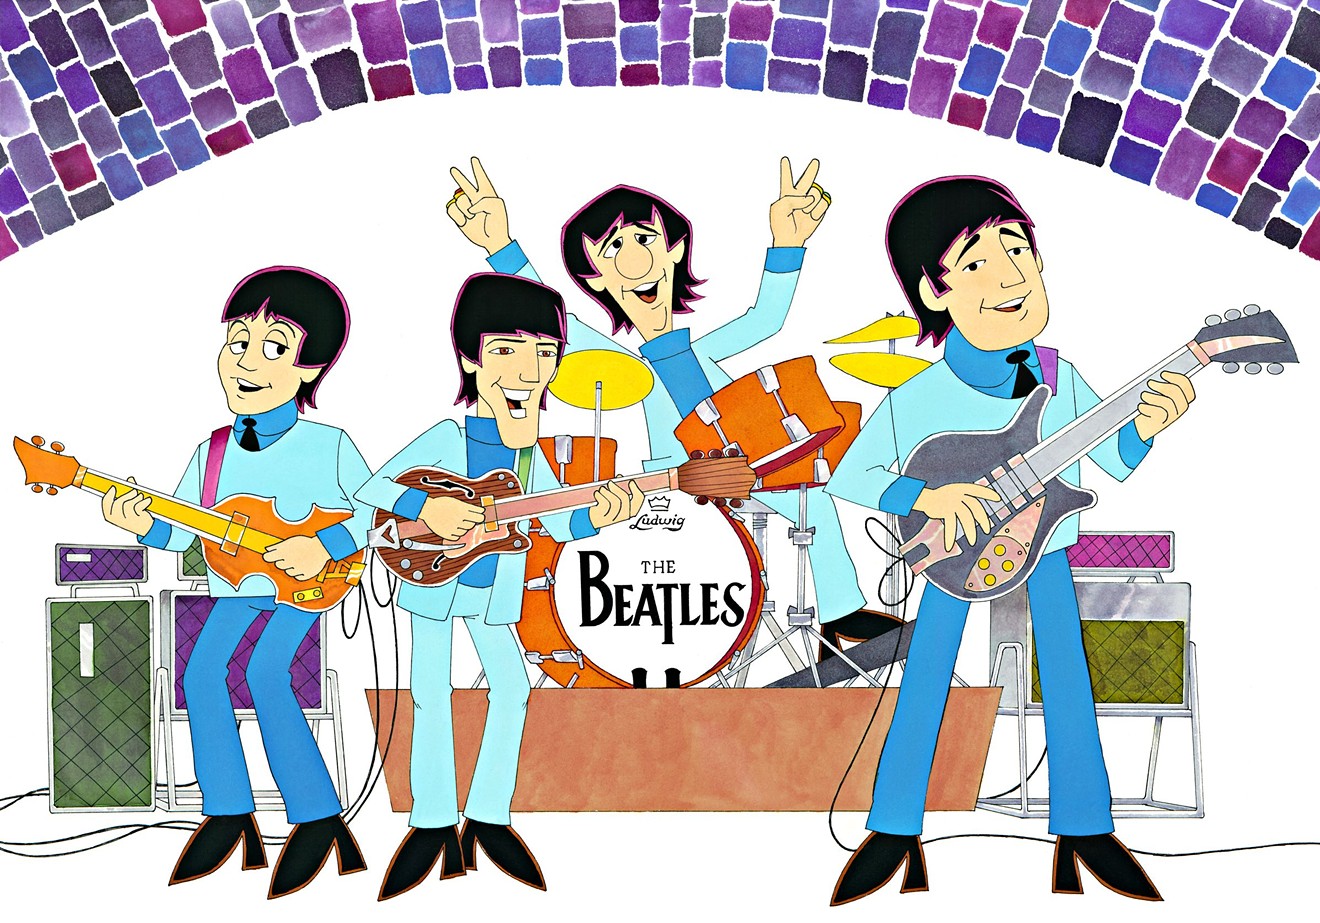 "The Beatles Live at the Cavern" by Ron Campbell